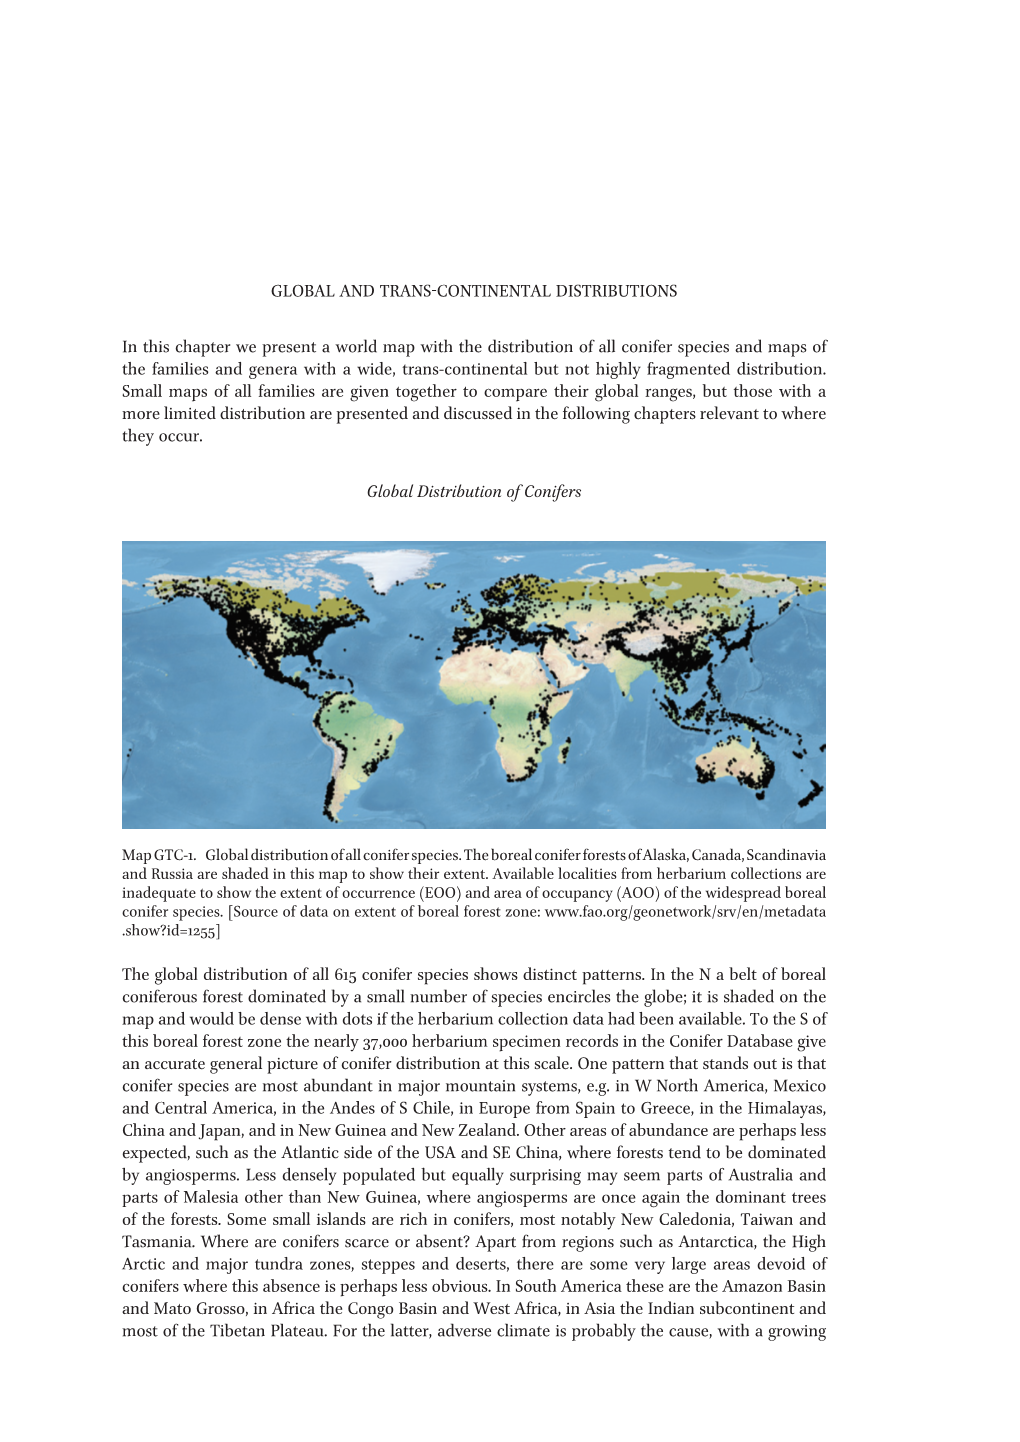 Global and Trans-Continental Distributions in This Chapter We